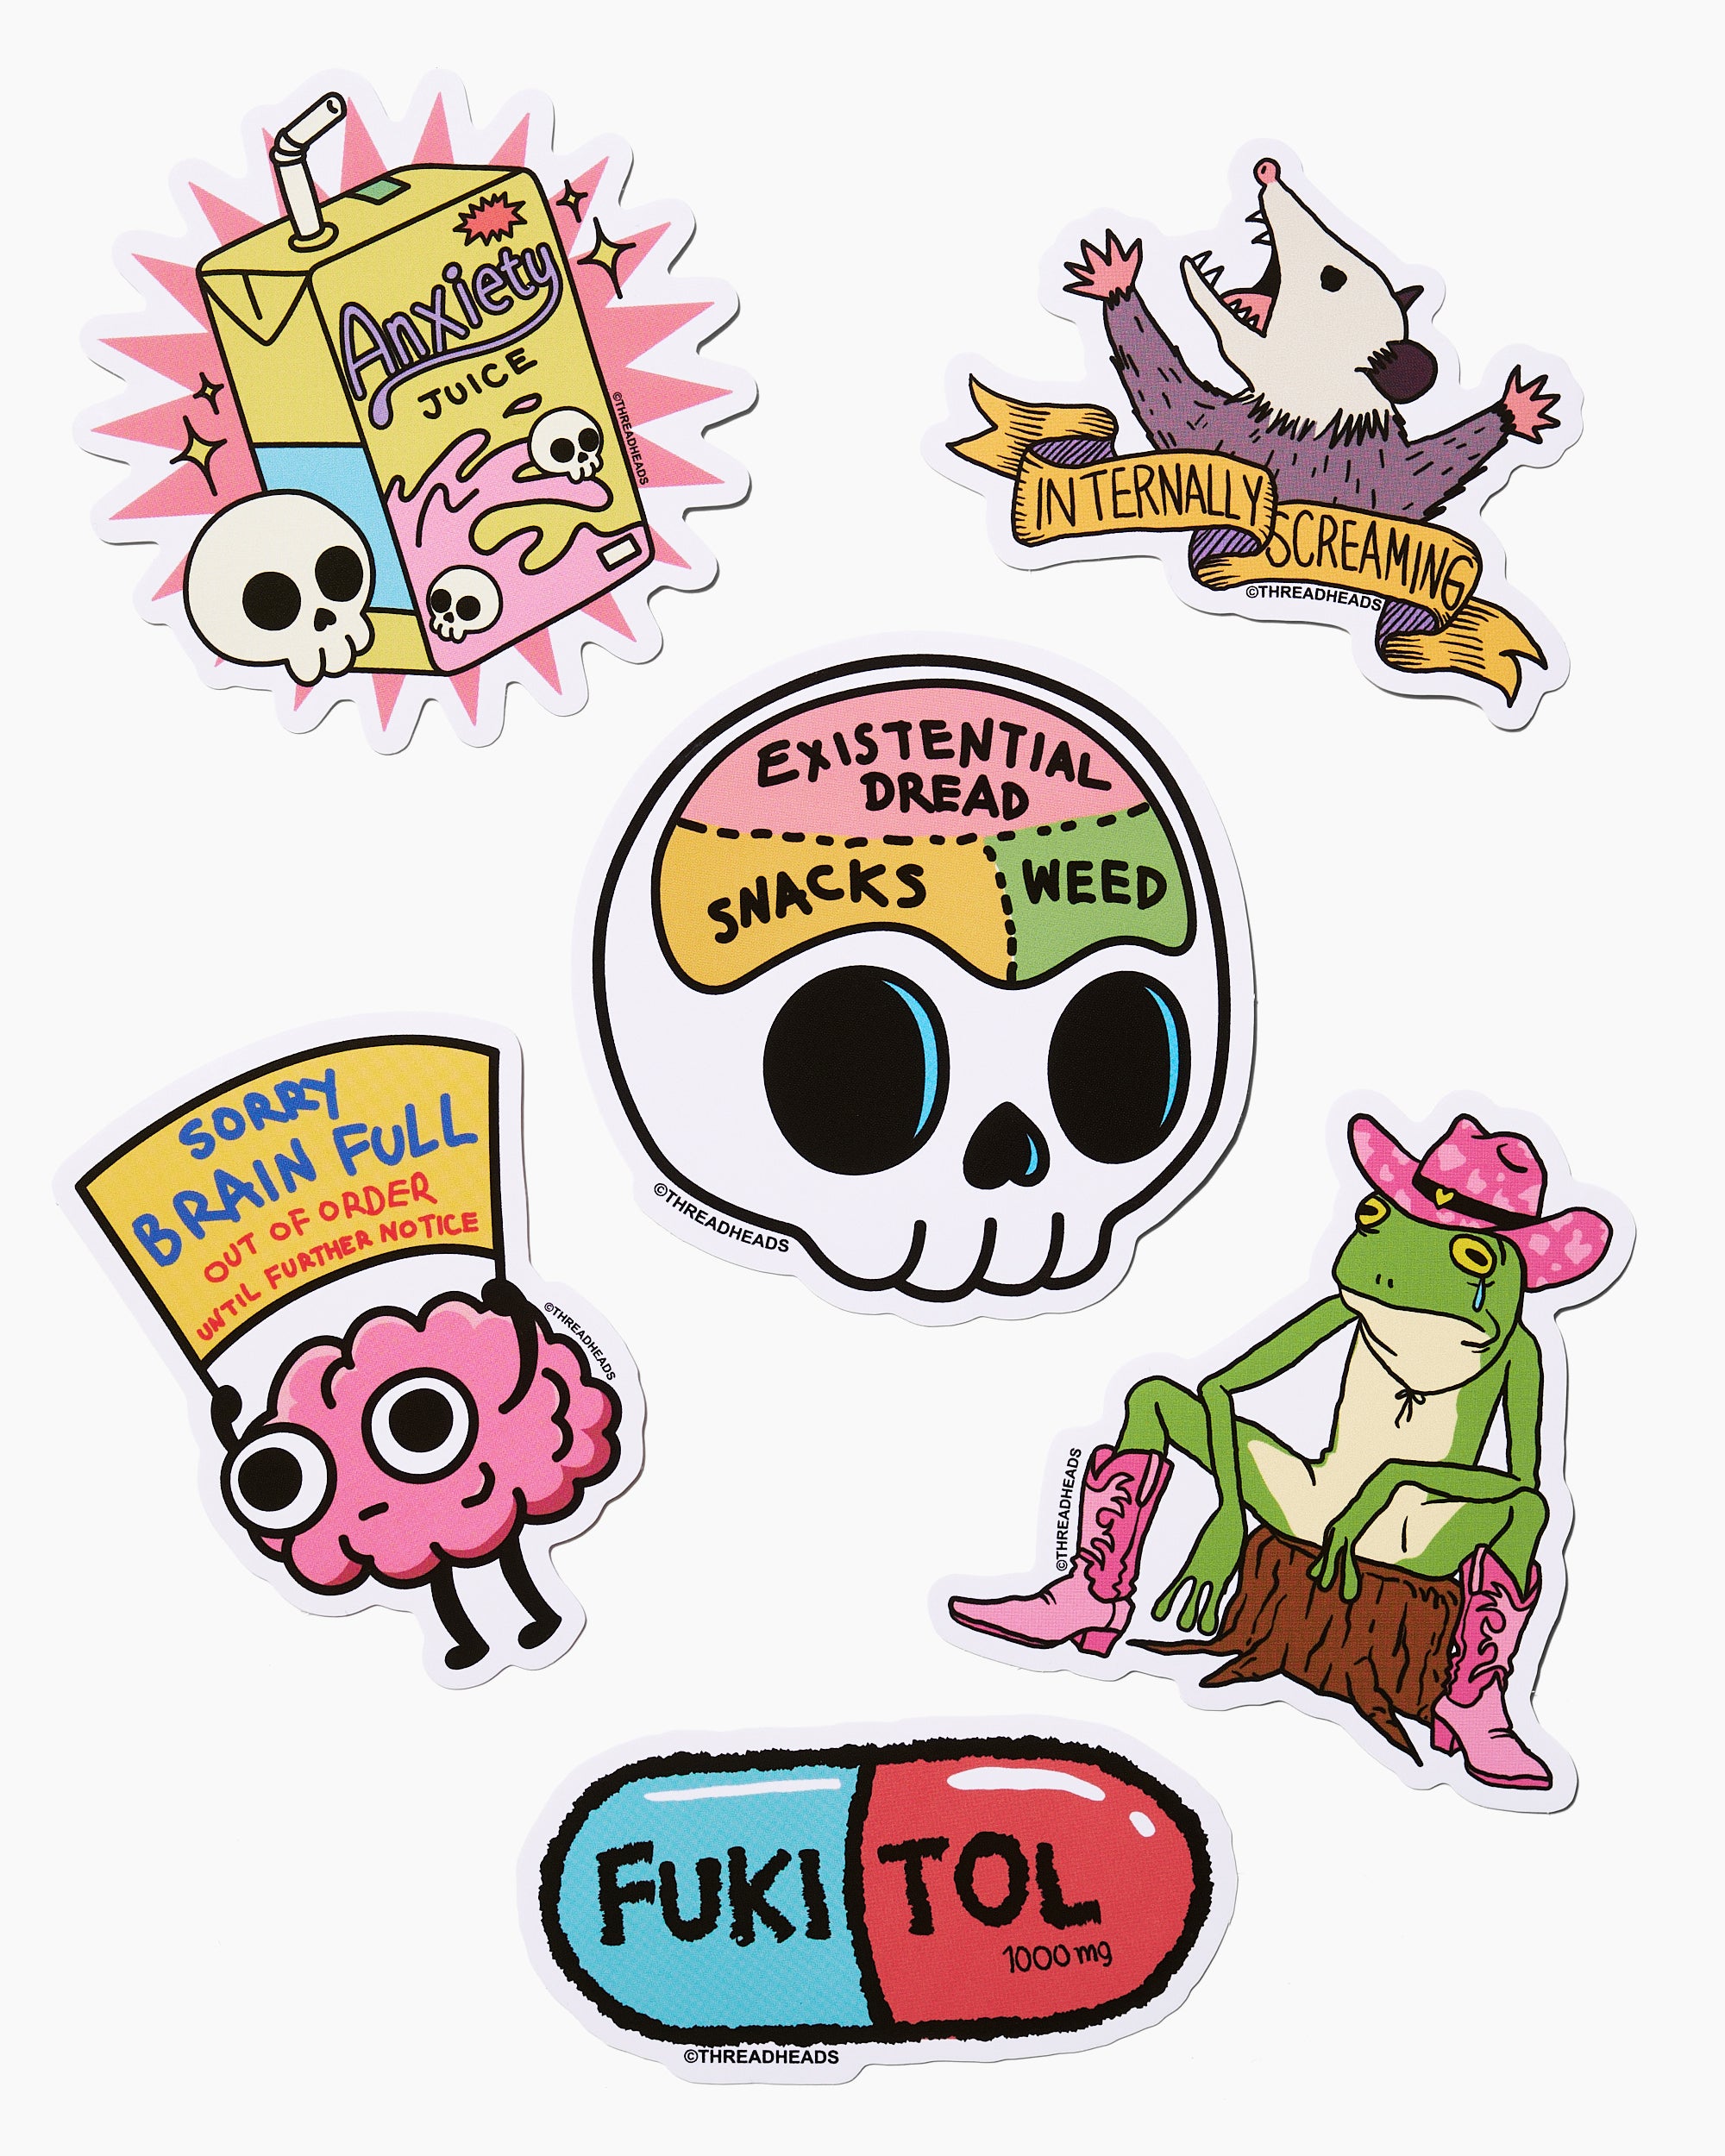 The Dread Sticker Pack